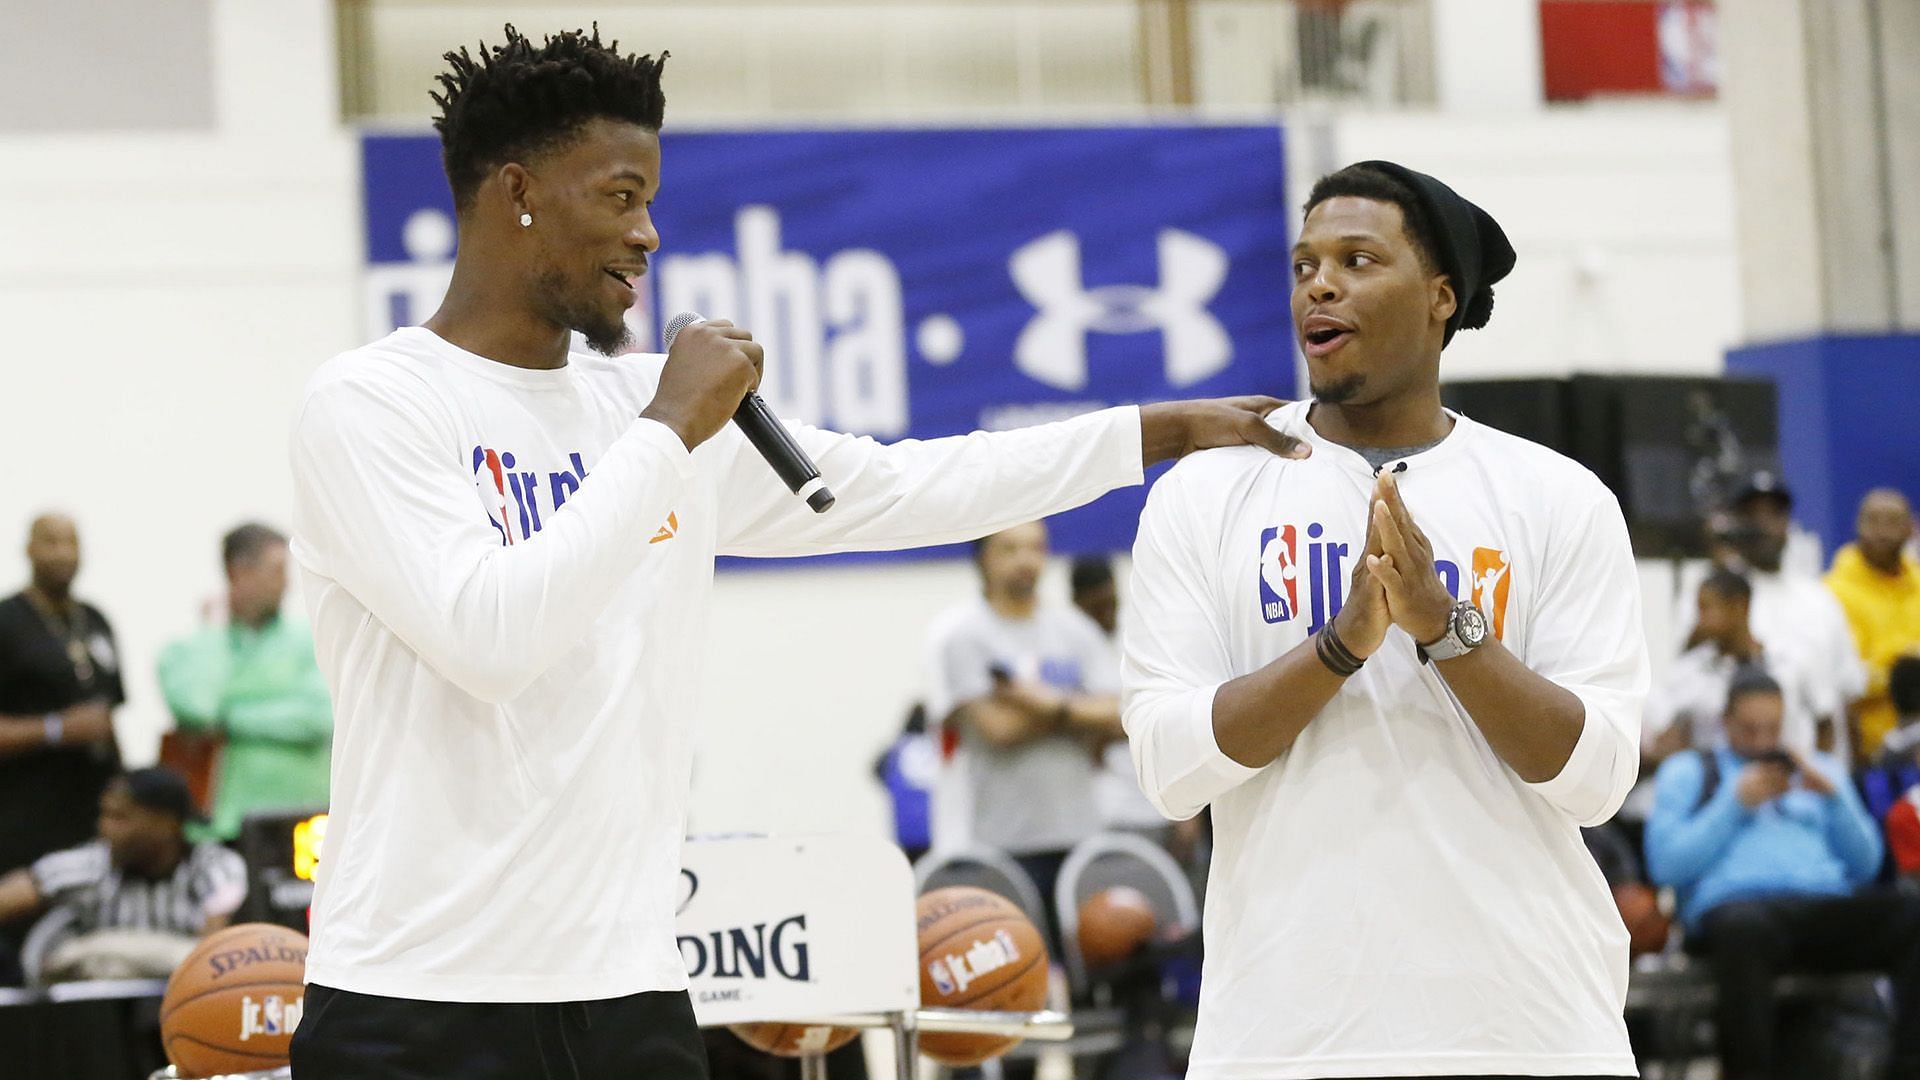 The friendship between Jimmy Butler and Kyle Lowry should thrive as Miami Heat teammates